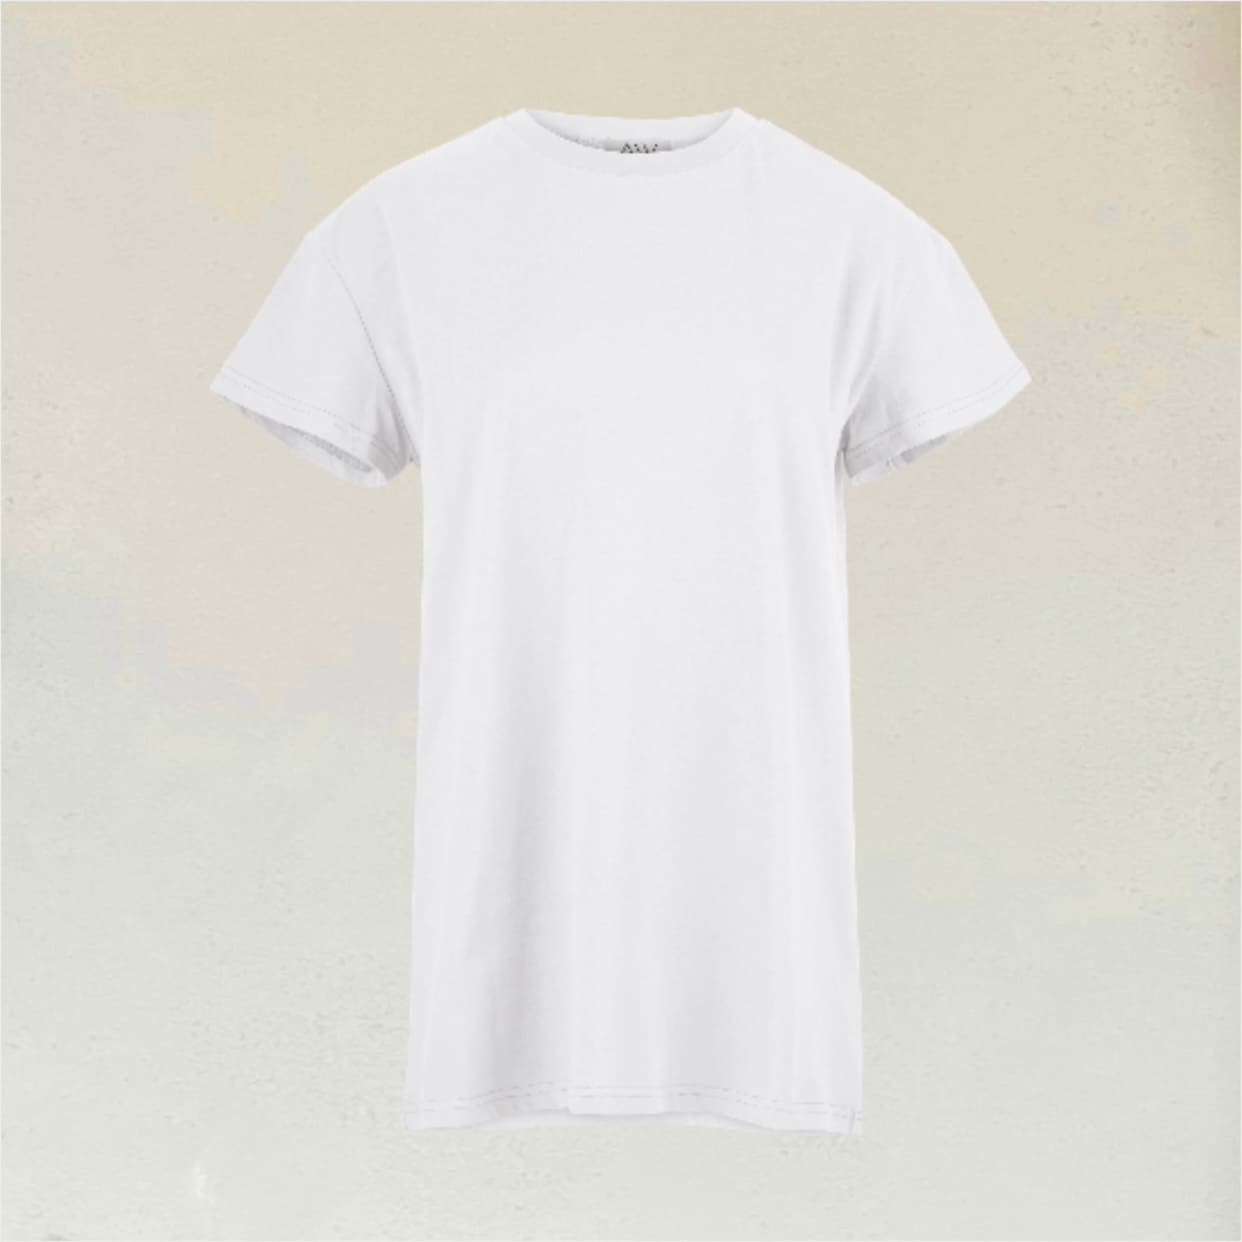 White T-Shirt in front of beige background